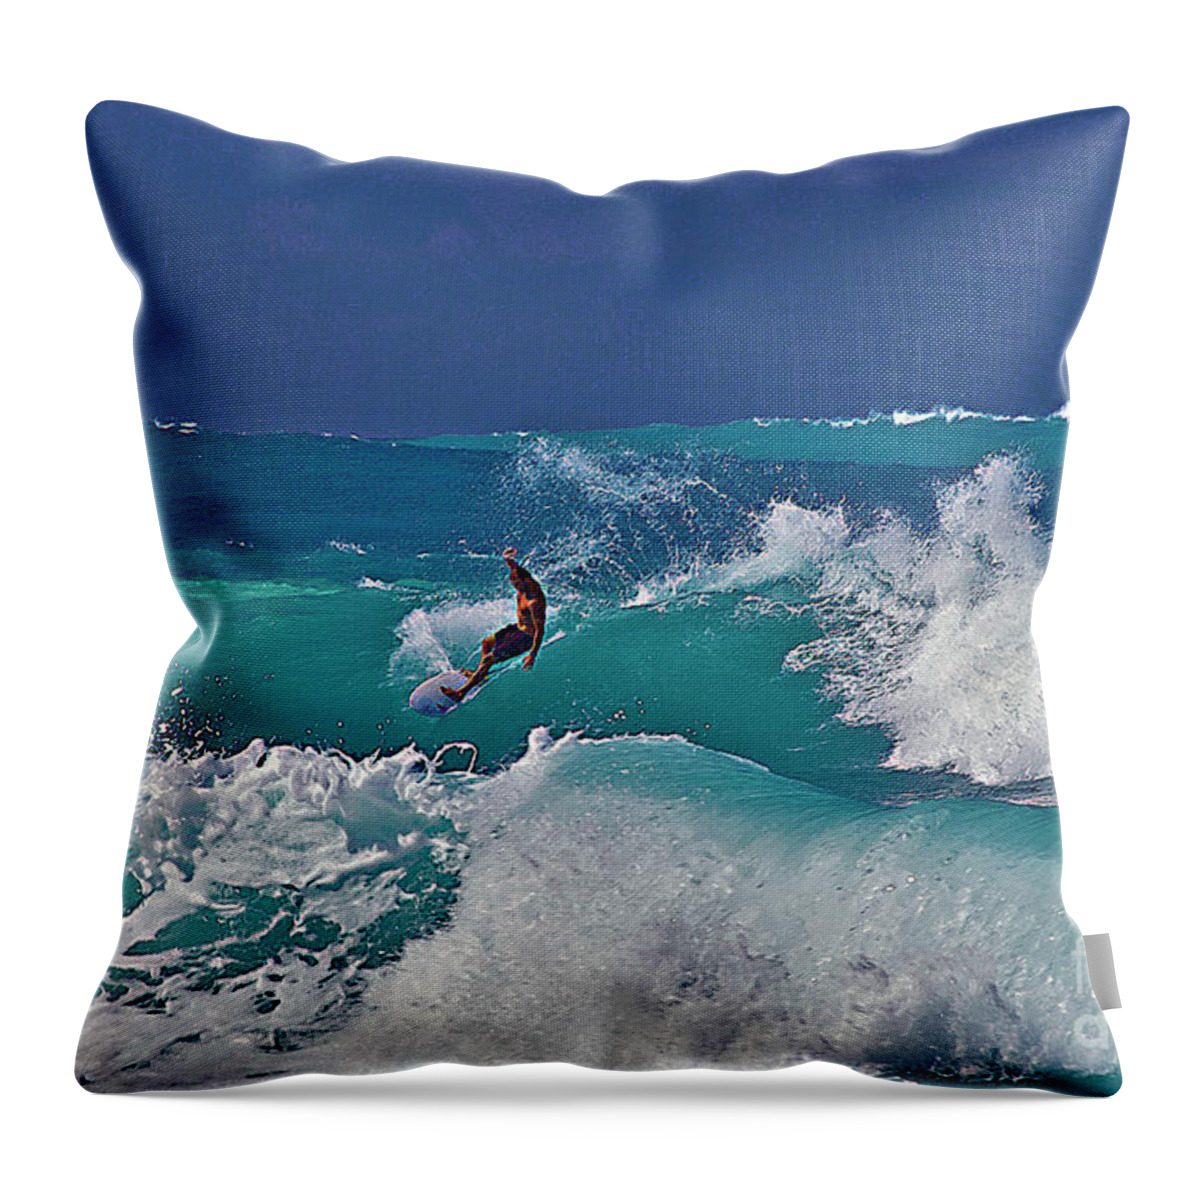 Surfing Throw Pillow featuring the photograph Surfing at Anaeho'omalu Bay by Bette Phelan